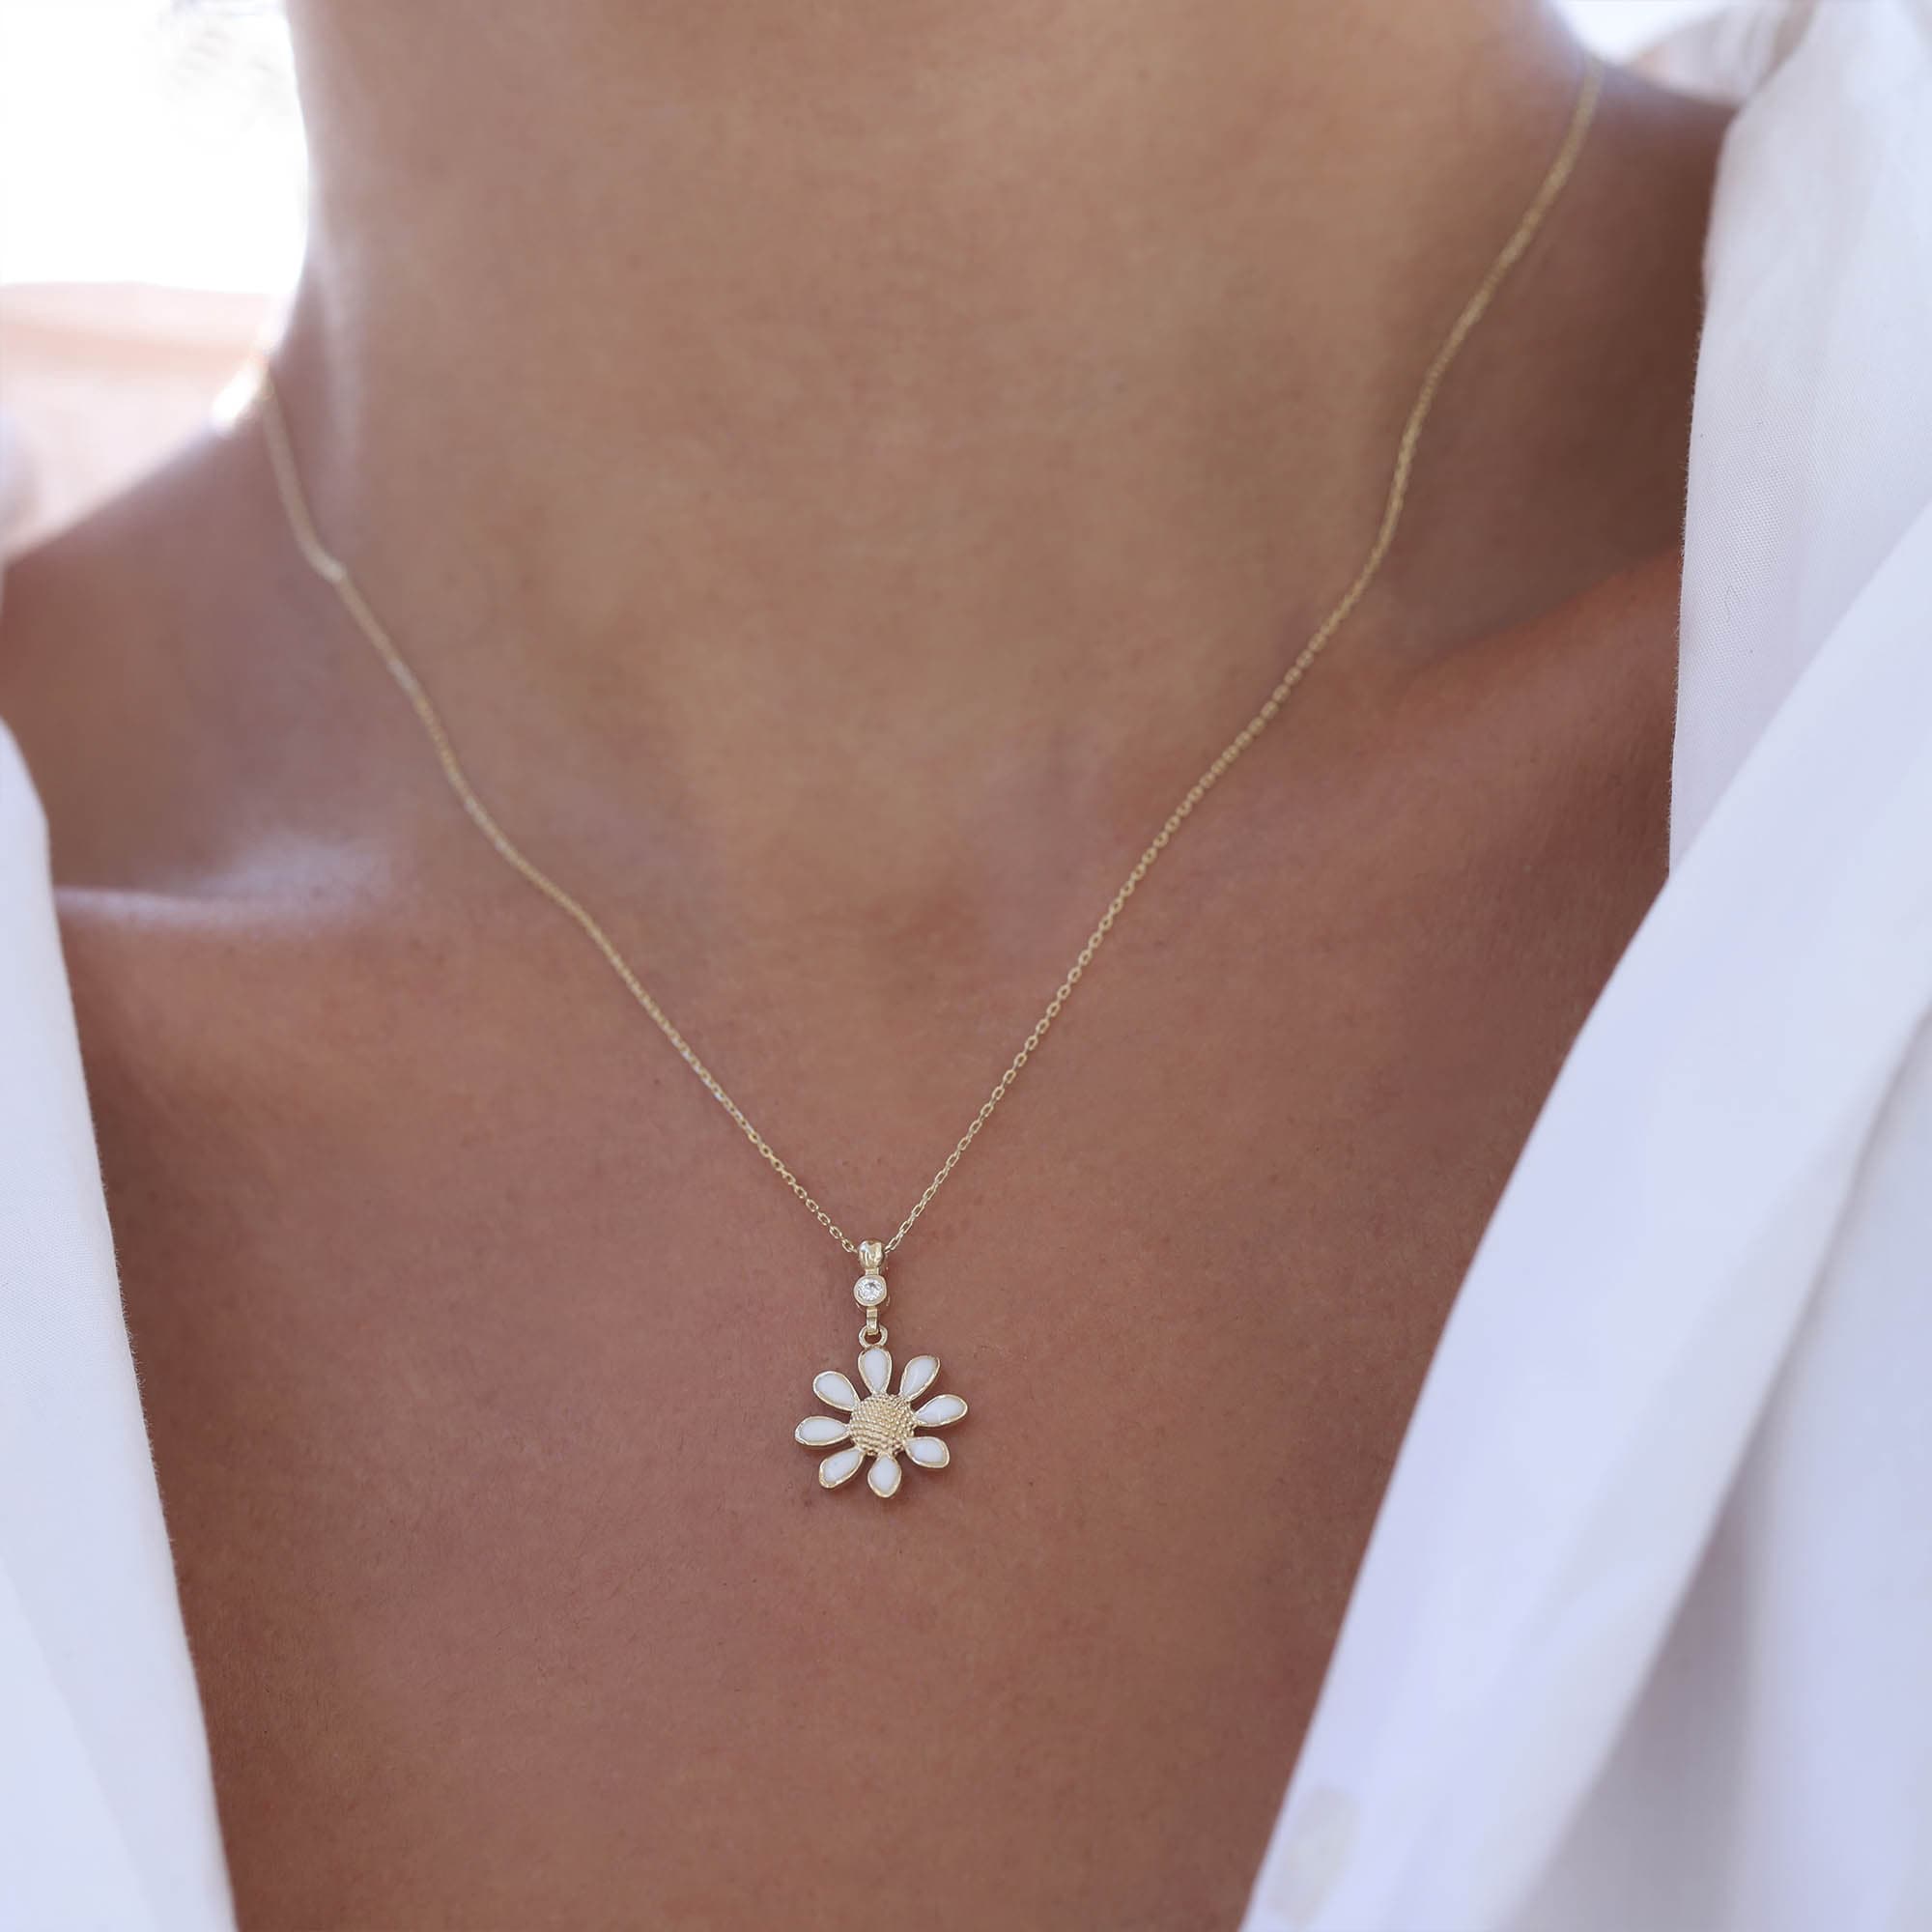 Worn gold daisy necklace